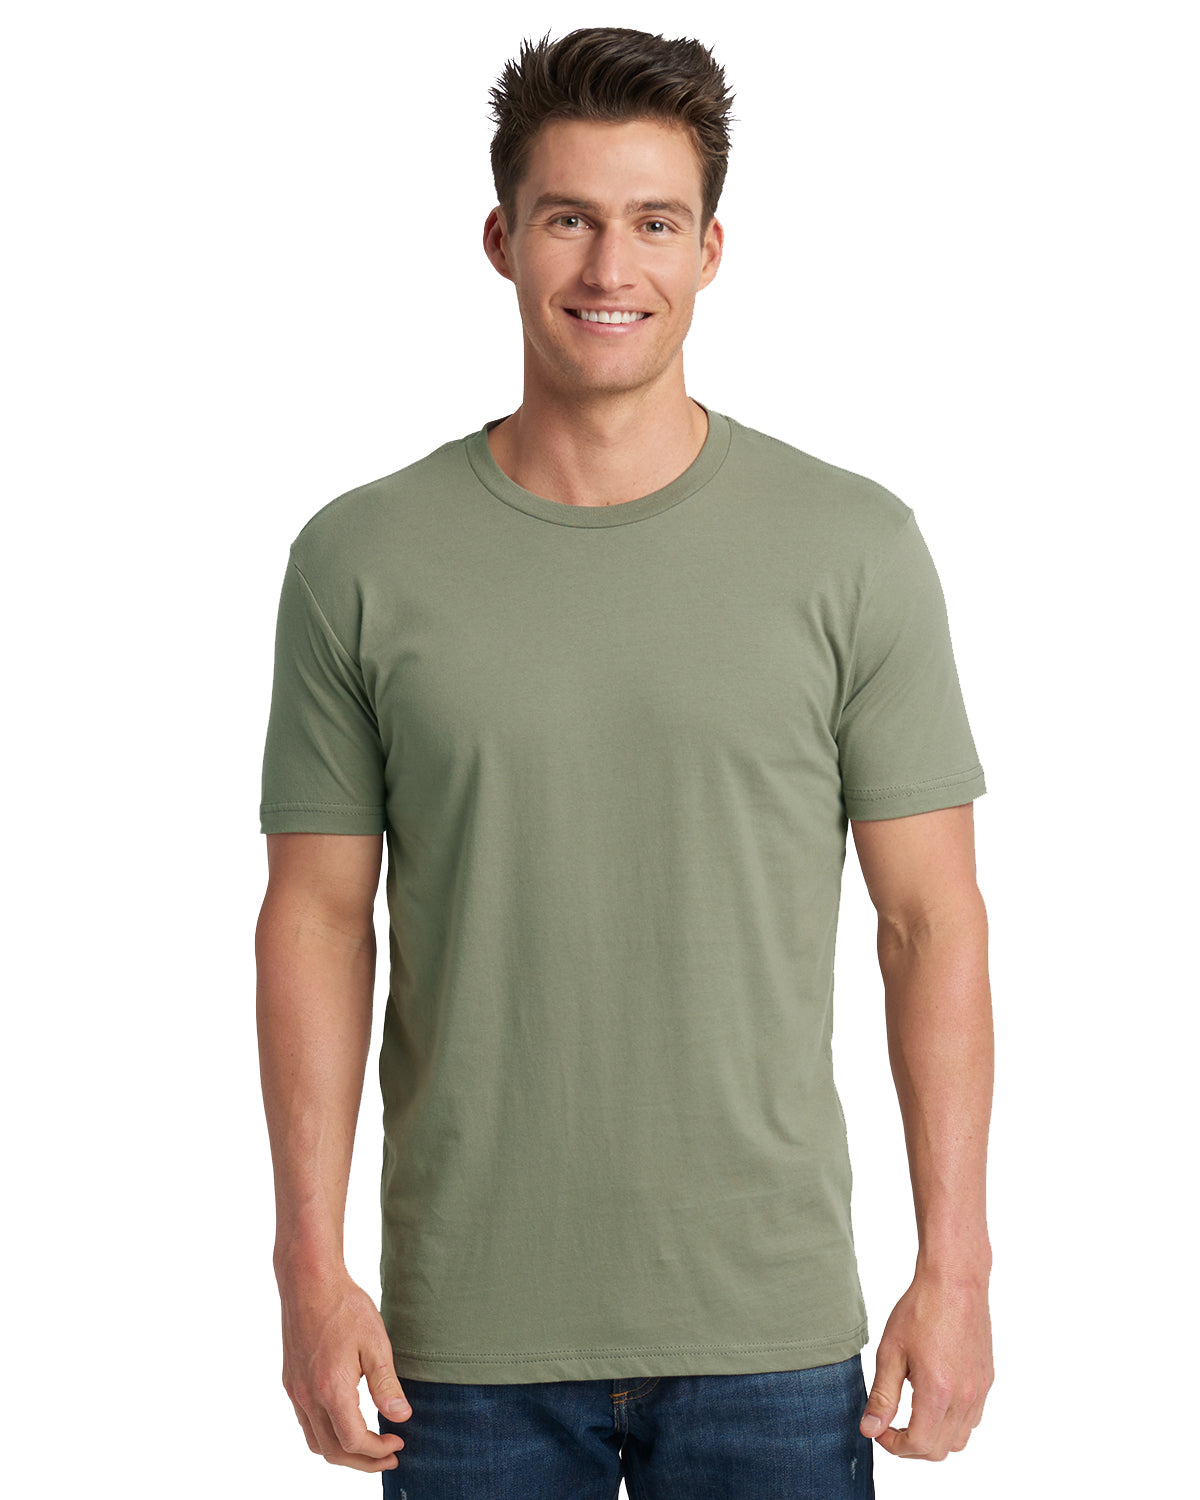 model wearing next level unisex cotton tee in light olive